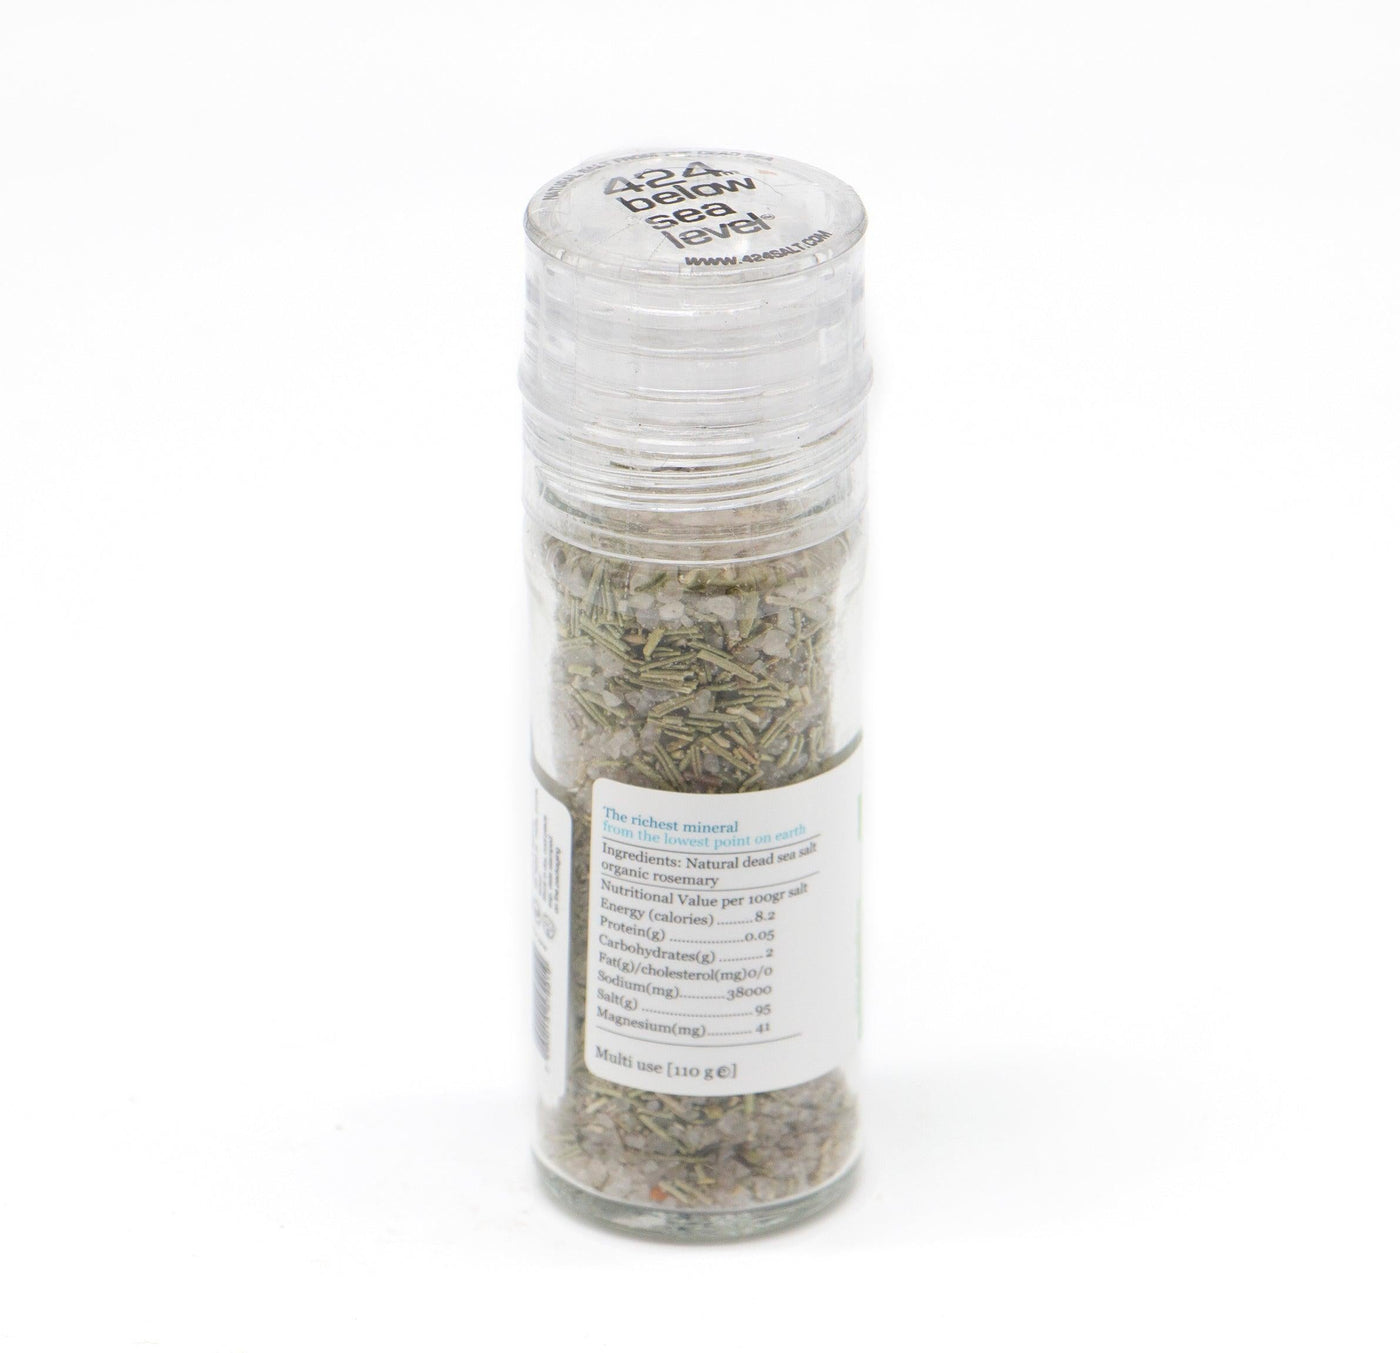 Salt with Organic Rosemary Gourmet From The Dead Sea 3.87oz / 110 grams - Spring Nahal